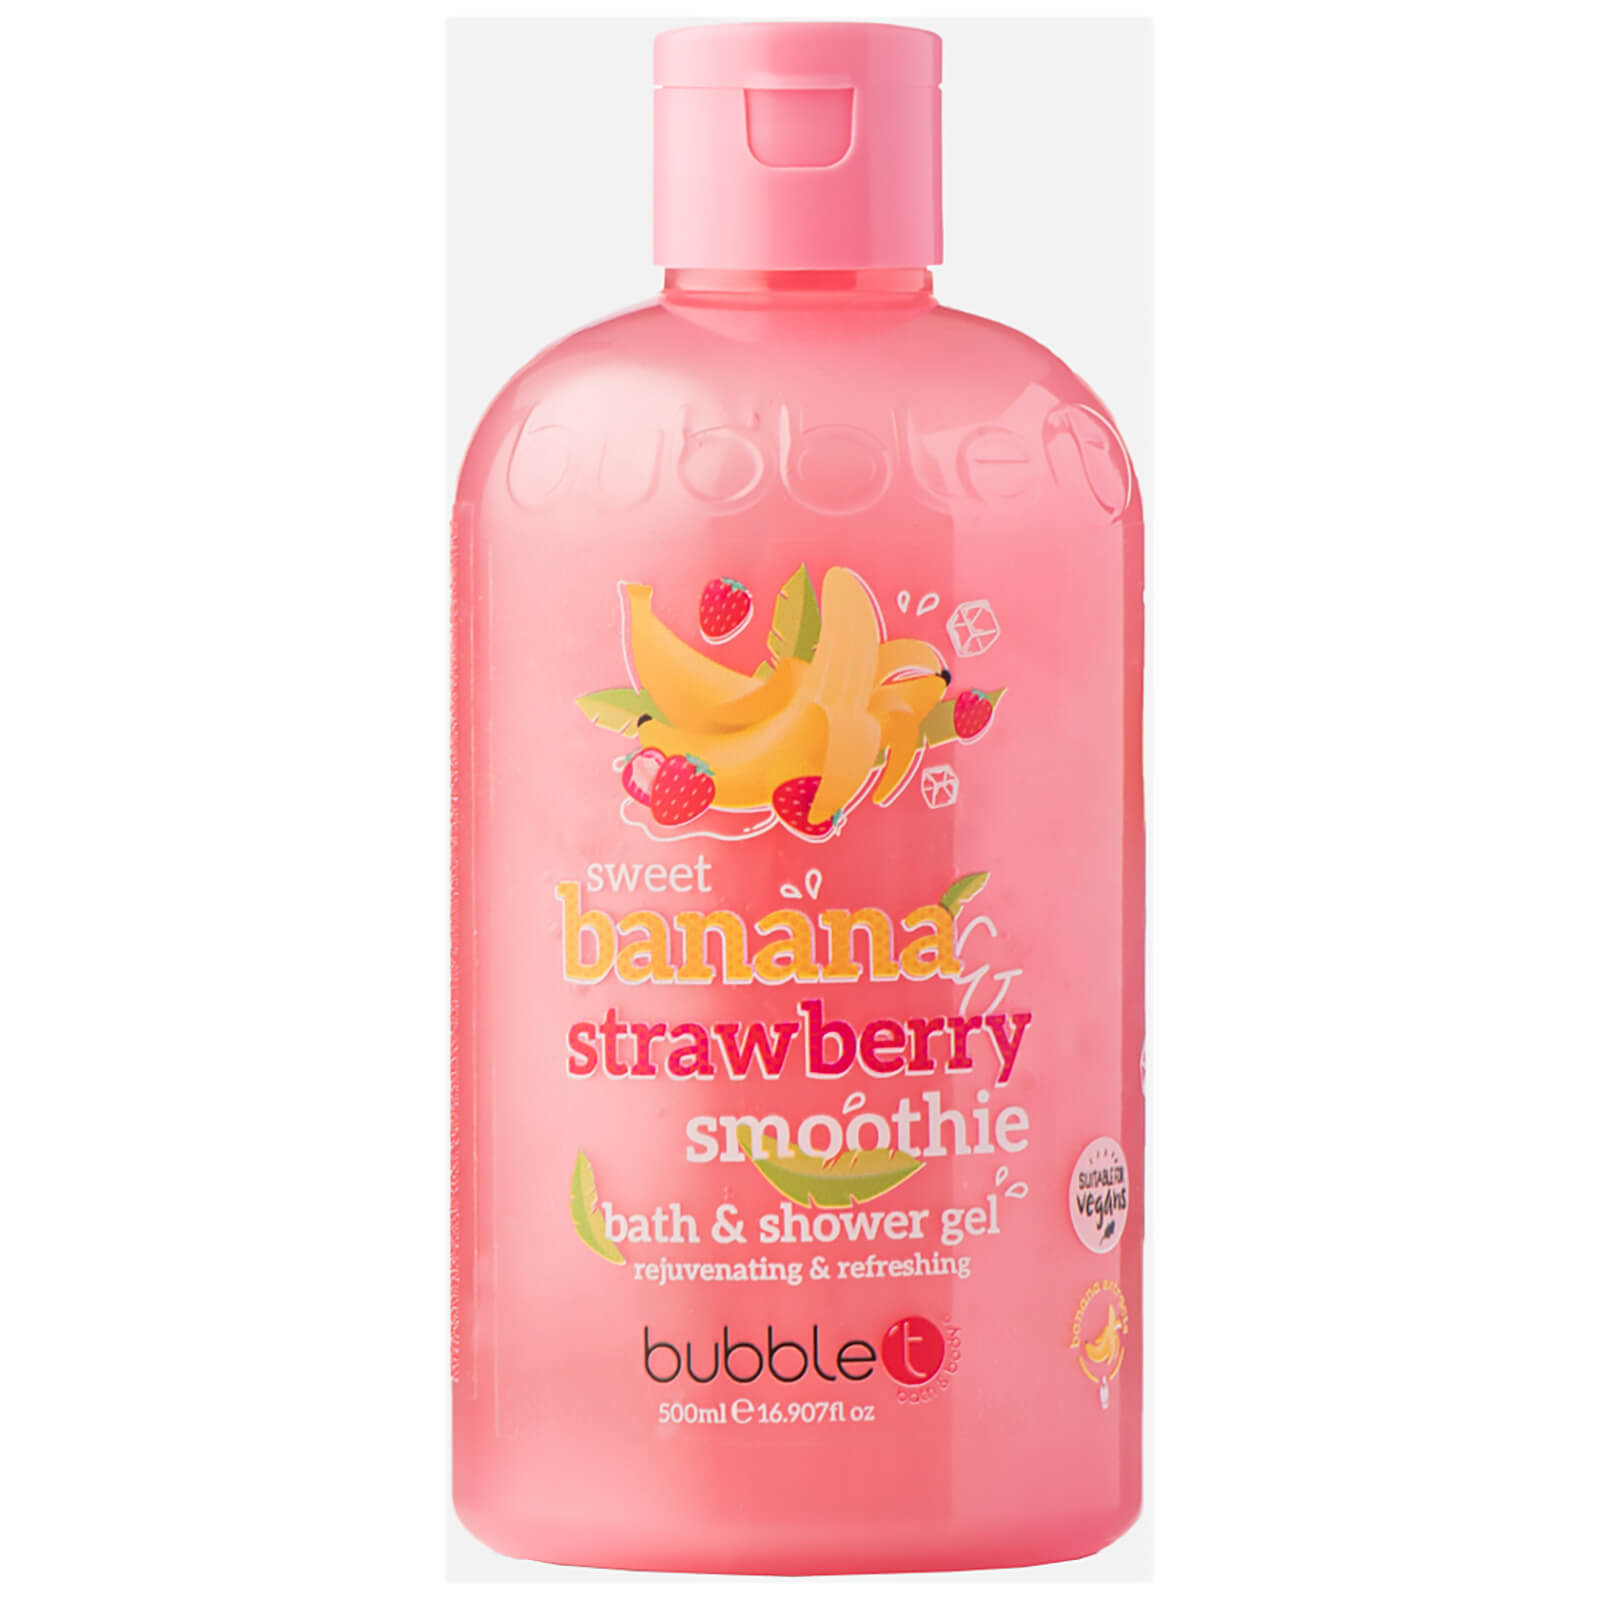 Bubble T Cosmetics Banana and Strawberry Smoothie Bath and Shower Gel 500ml